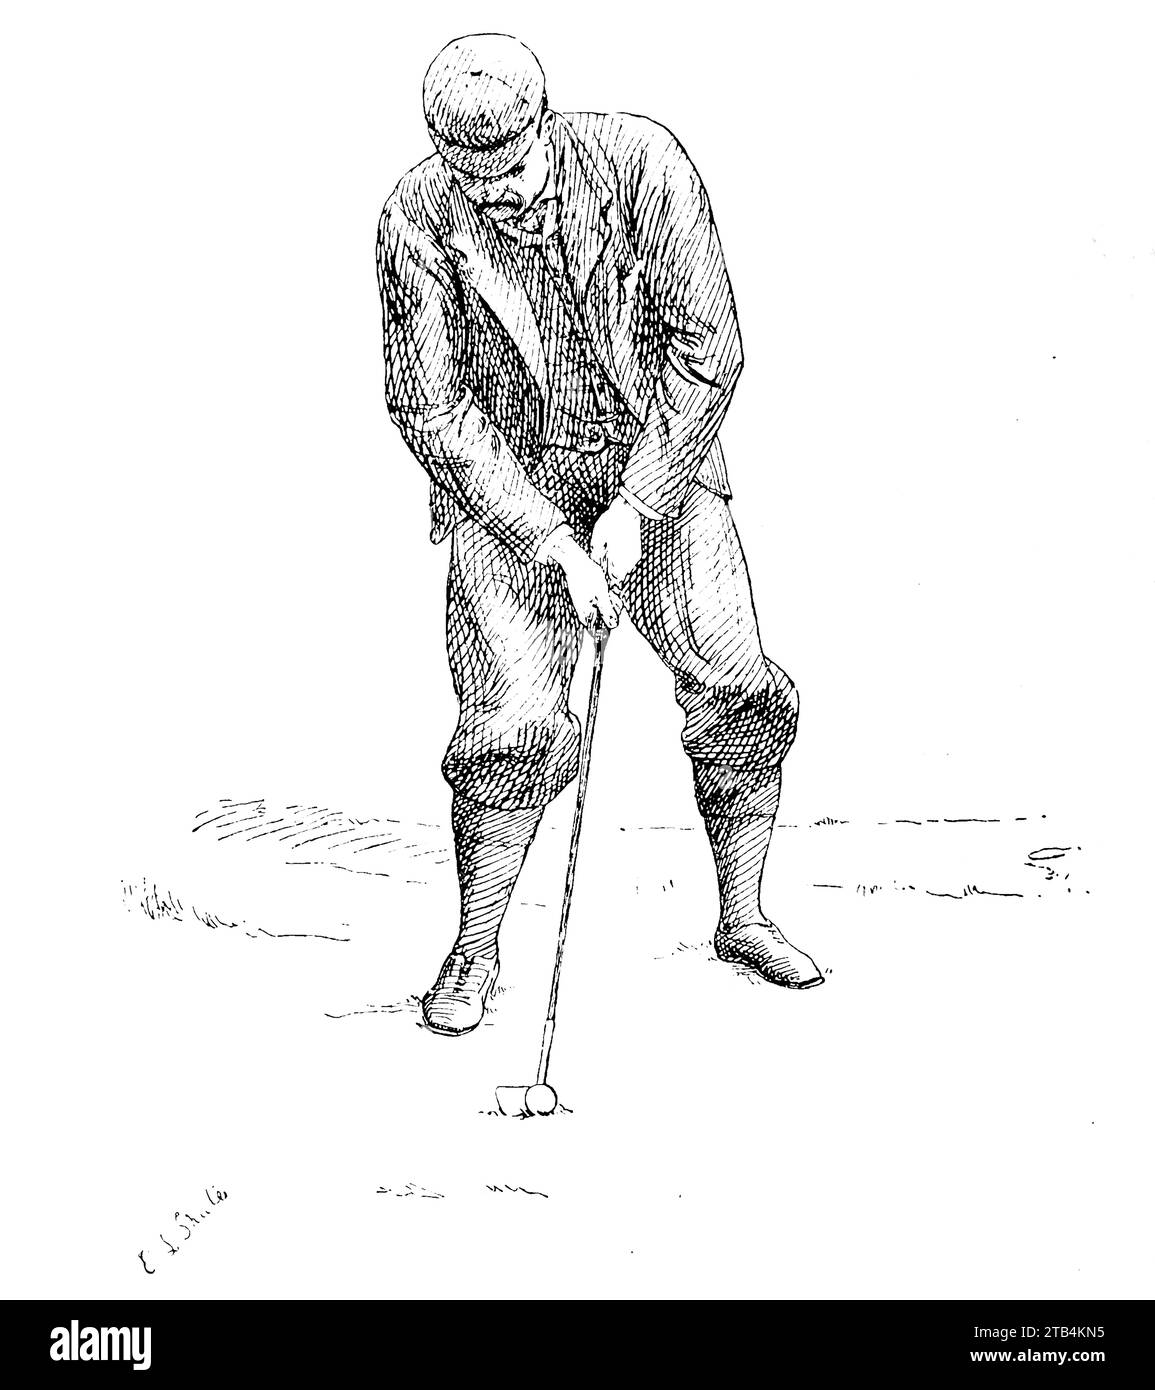 The Position for the Approach Shot, by E.L. Shute. From an illustration about golf, dating from 1889 to 1901. The history of golf is a long one. Though its origins are disputed, historians are generally agreed that what is known as “modern” golf began in the Middle Ages in Scotland. It was not until the mid to late nineteenth century that this sport became more popular in wider Britain, the British Empire and then the United States. Over the years the humble golf ball and golf club have changed vastly. Stock Photo